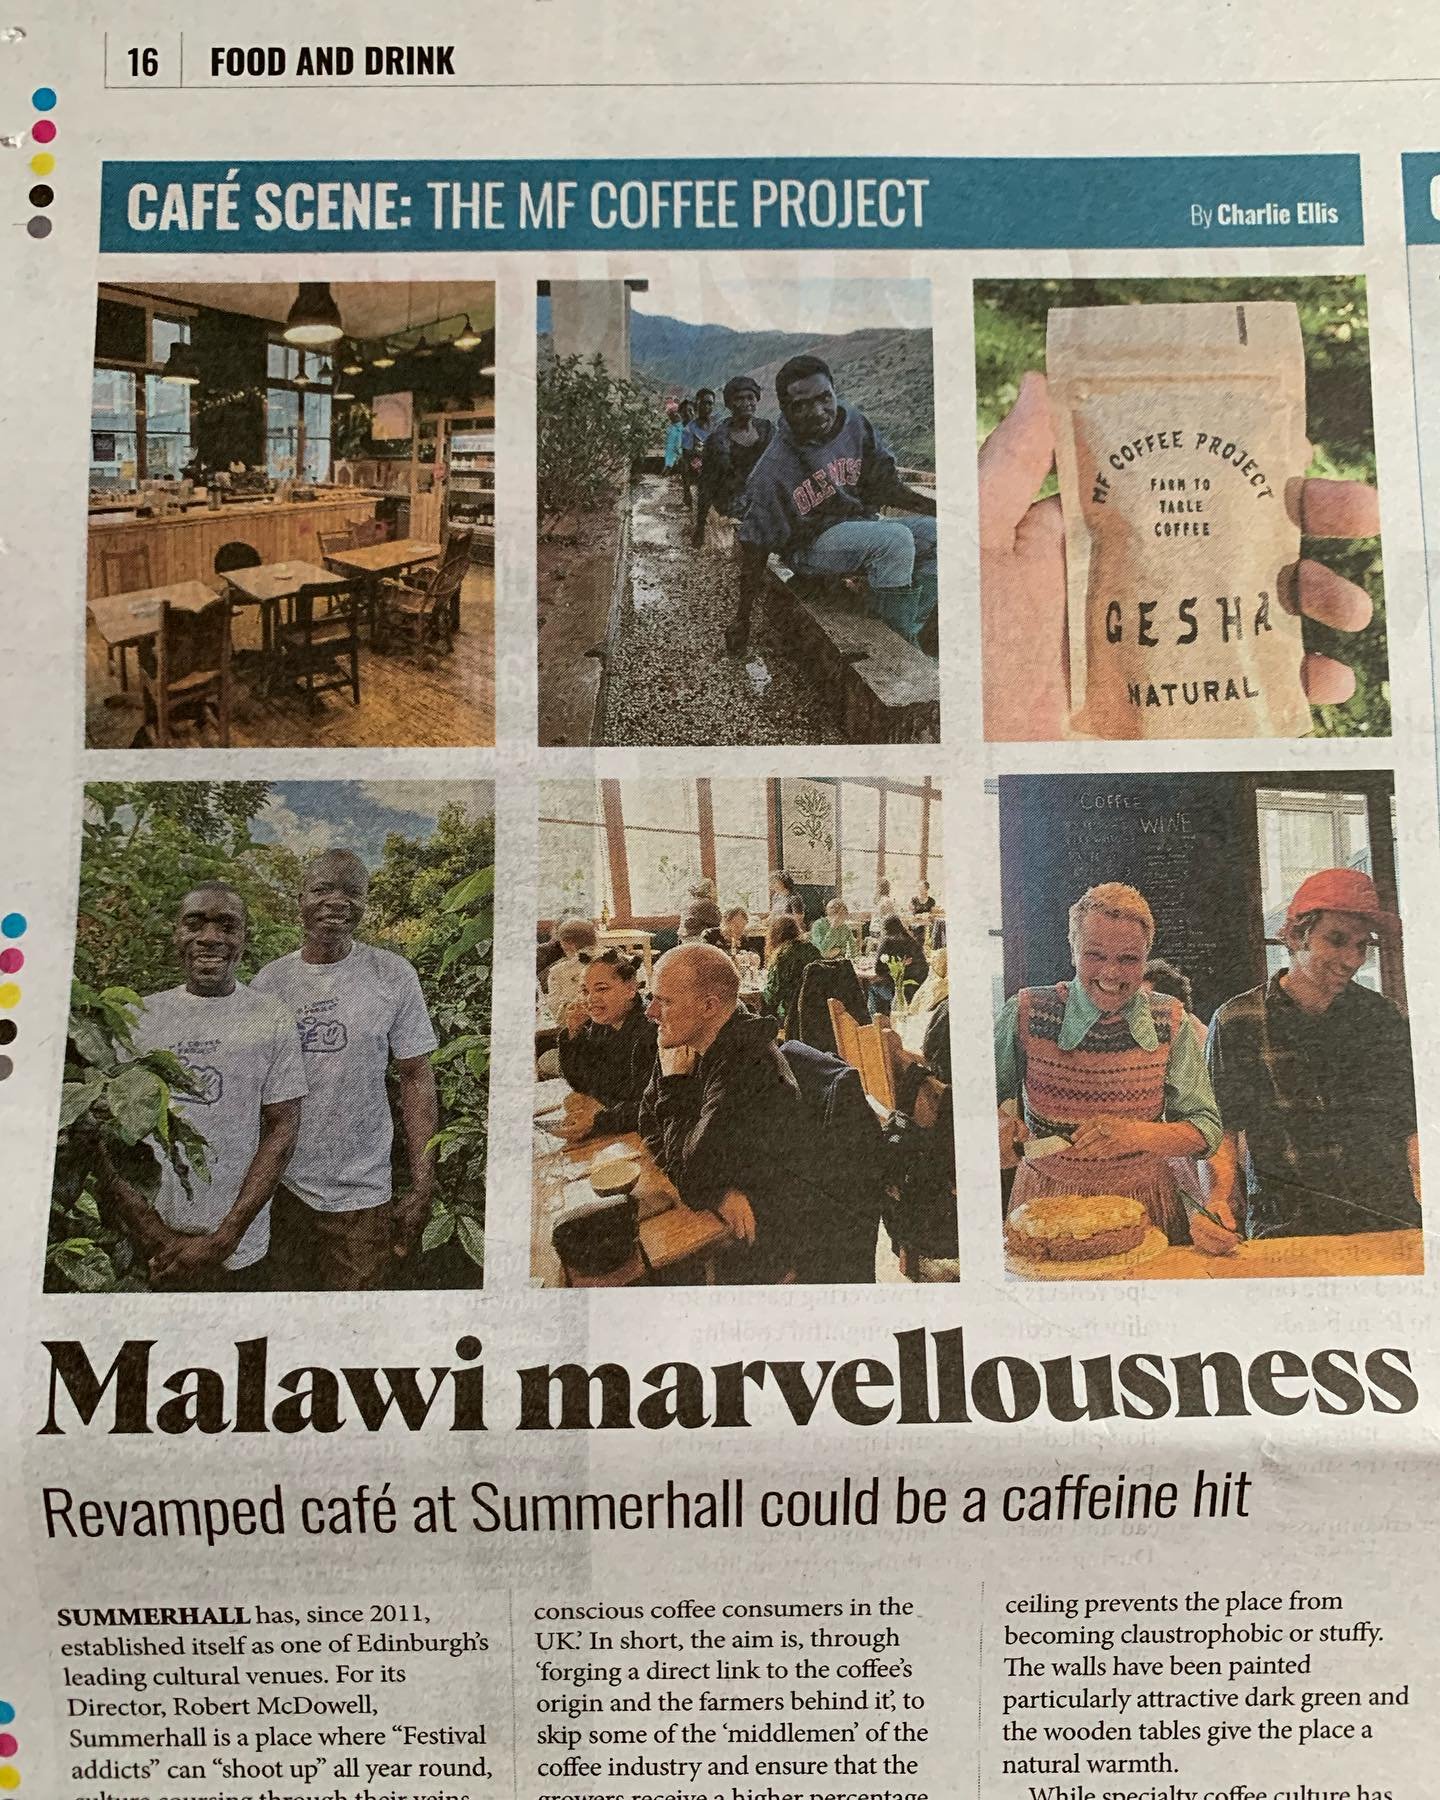 Malawi marvellousness! 

Such a nice article about @mfcoffeeshop in @edinburghreporter 

We are so SO happy to have a base to serve up Malawi coffee in Edinburgh. It&rsquo;s truly fulfilling to connect the two places through the miracle of coffee!

H